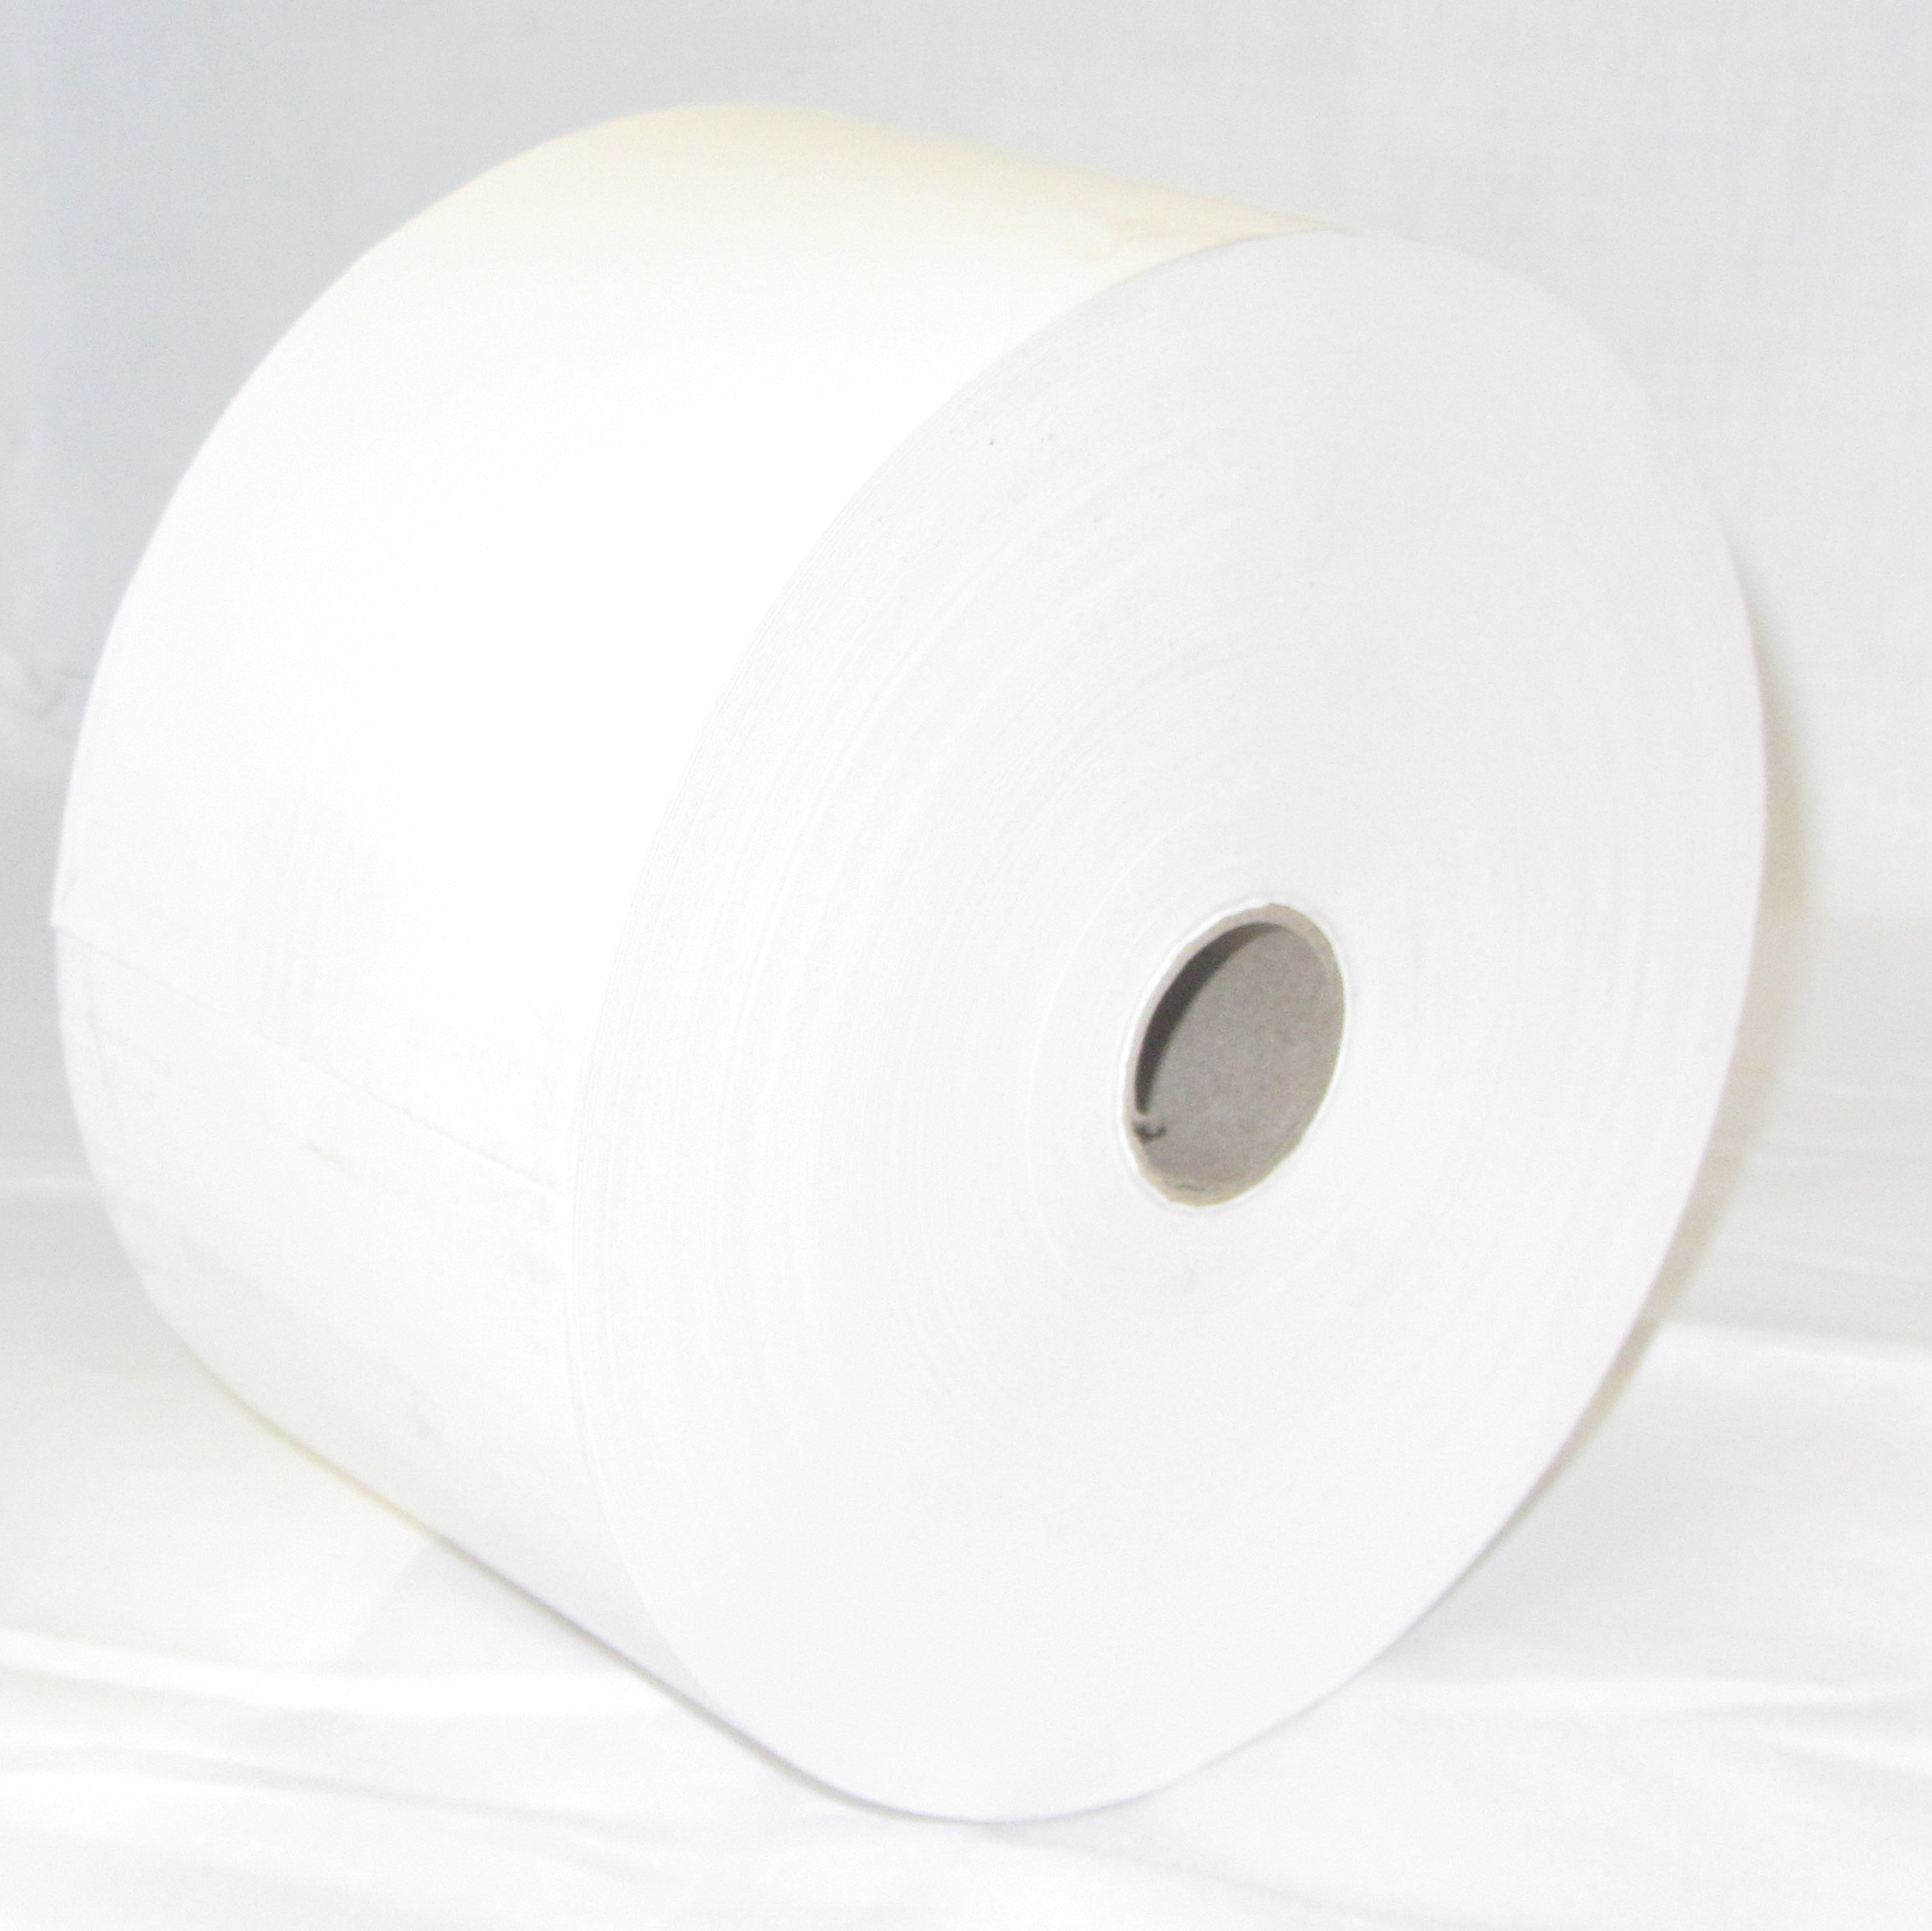 82mm x 150mmX 25.4 Thermal Paper  "TSPP9"  single (LARGE)  rolls